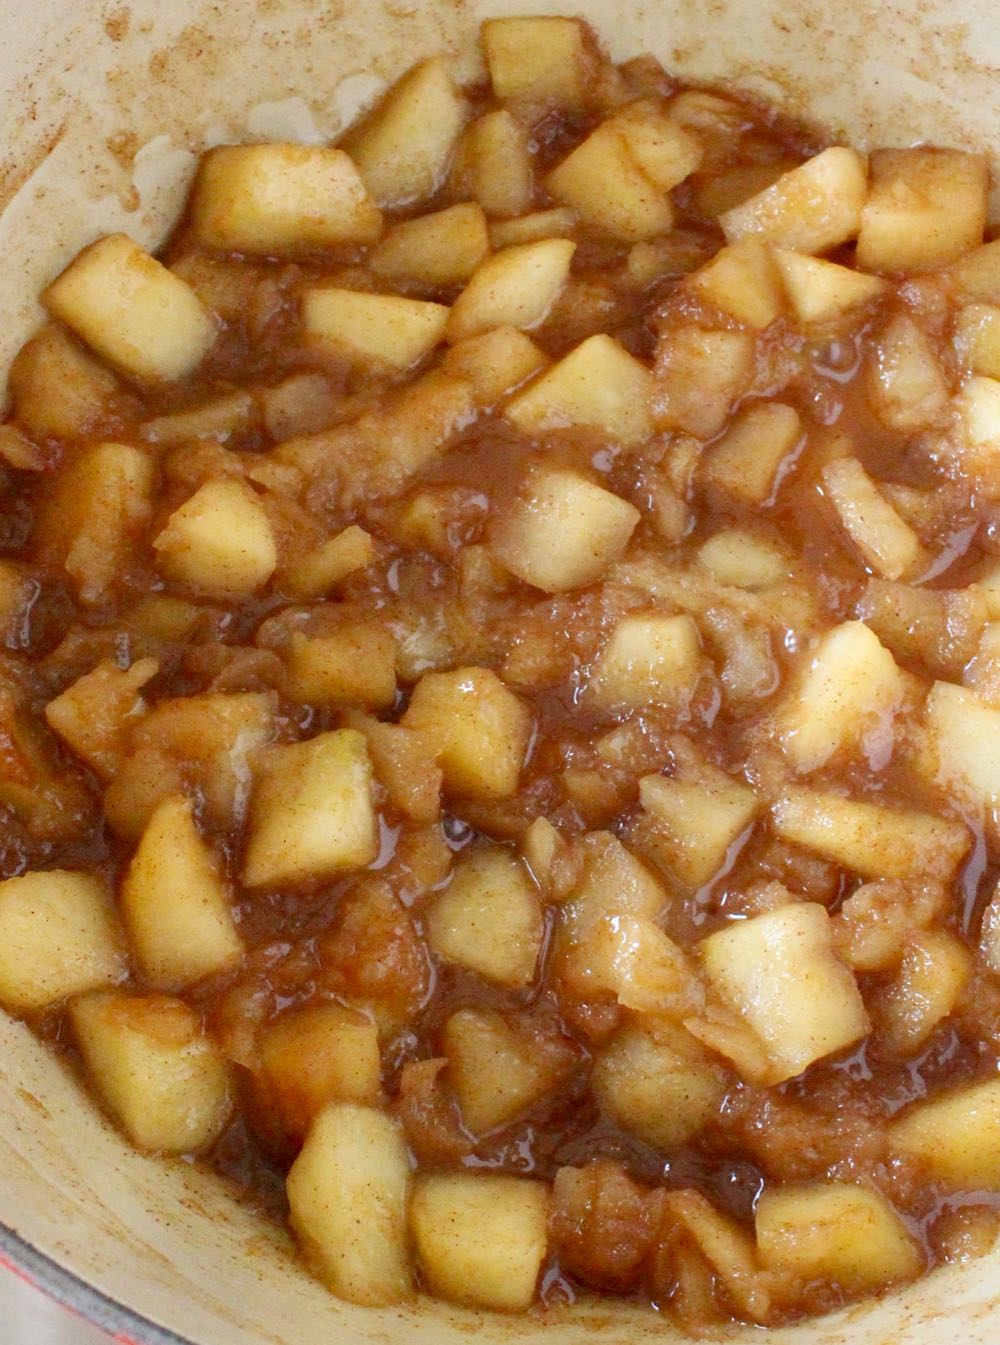 Homemade Apple Pie Filling from Scratch